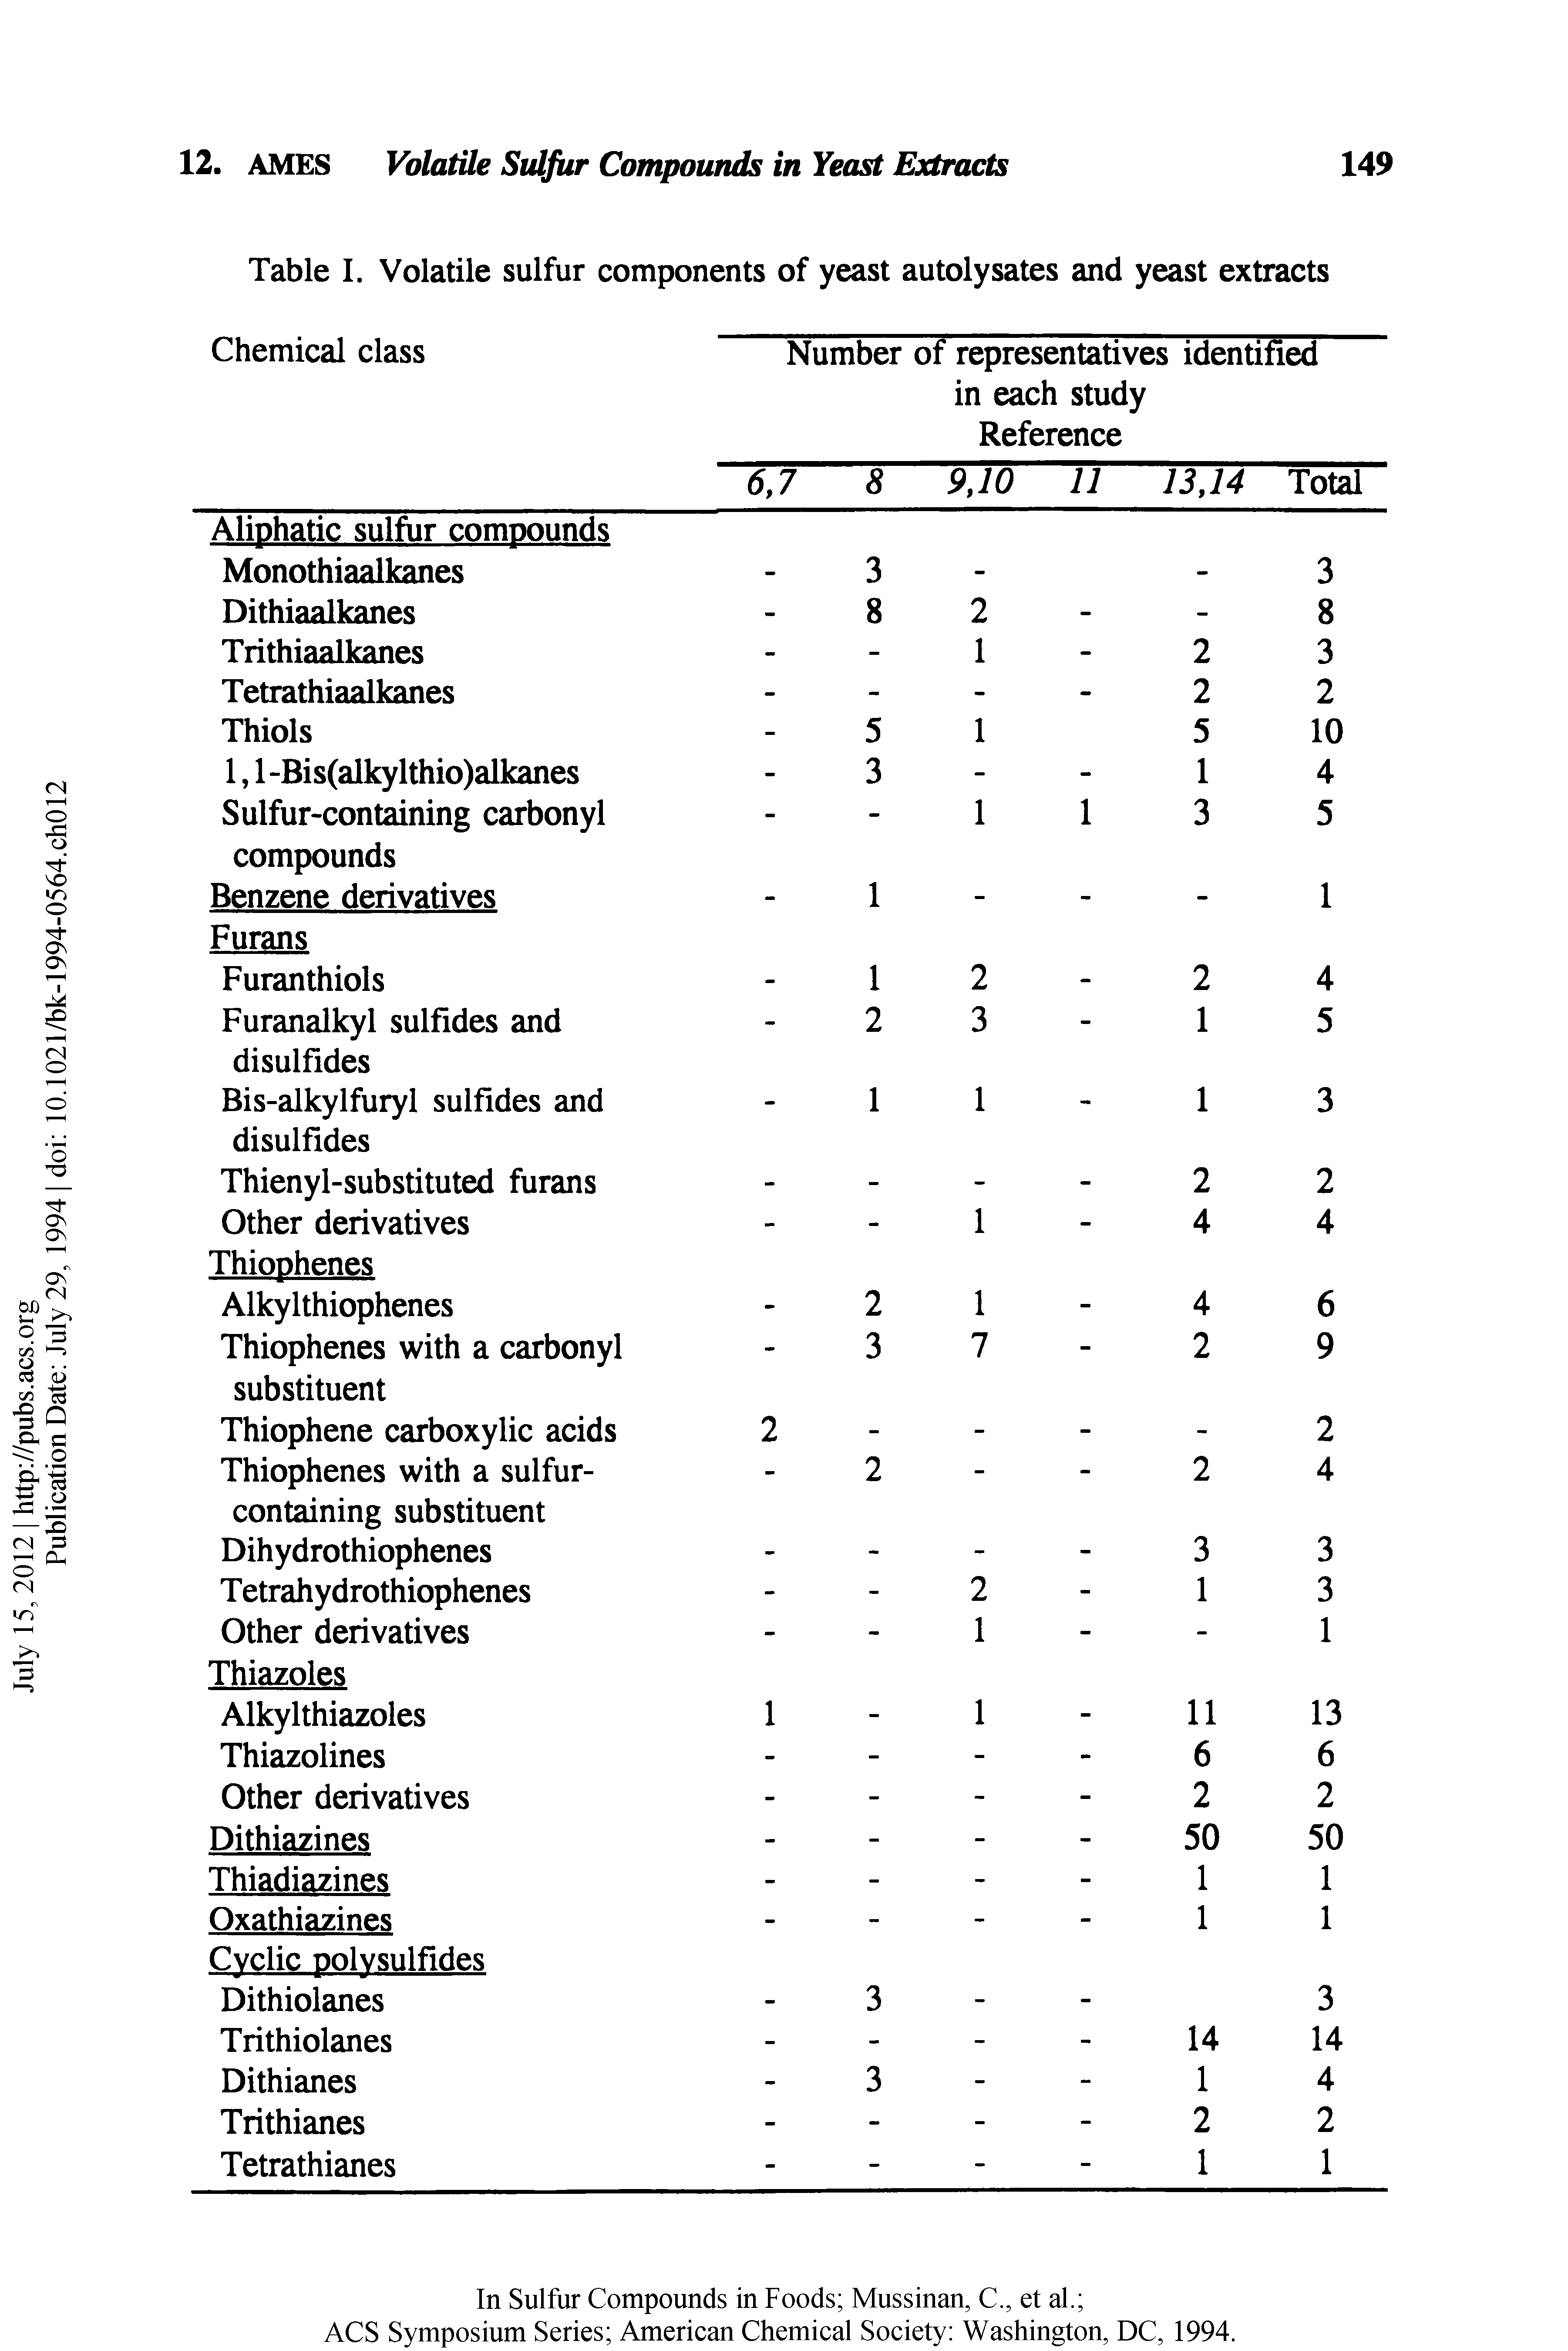 Table I. Volatile sulfur components of yeast autolysates and yeast extracts...